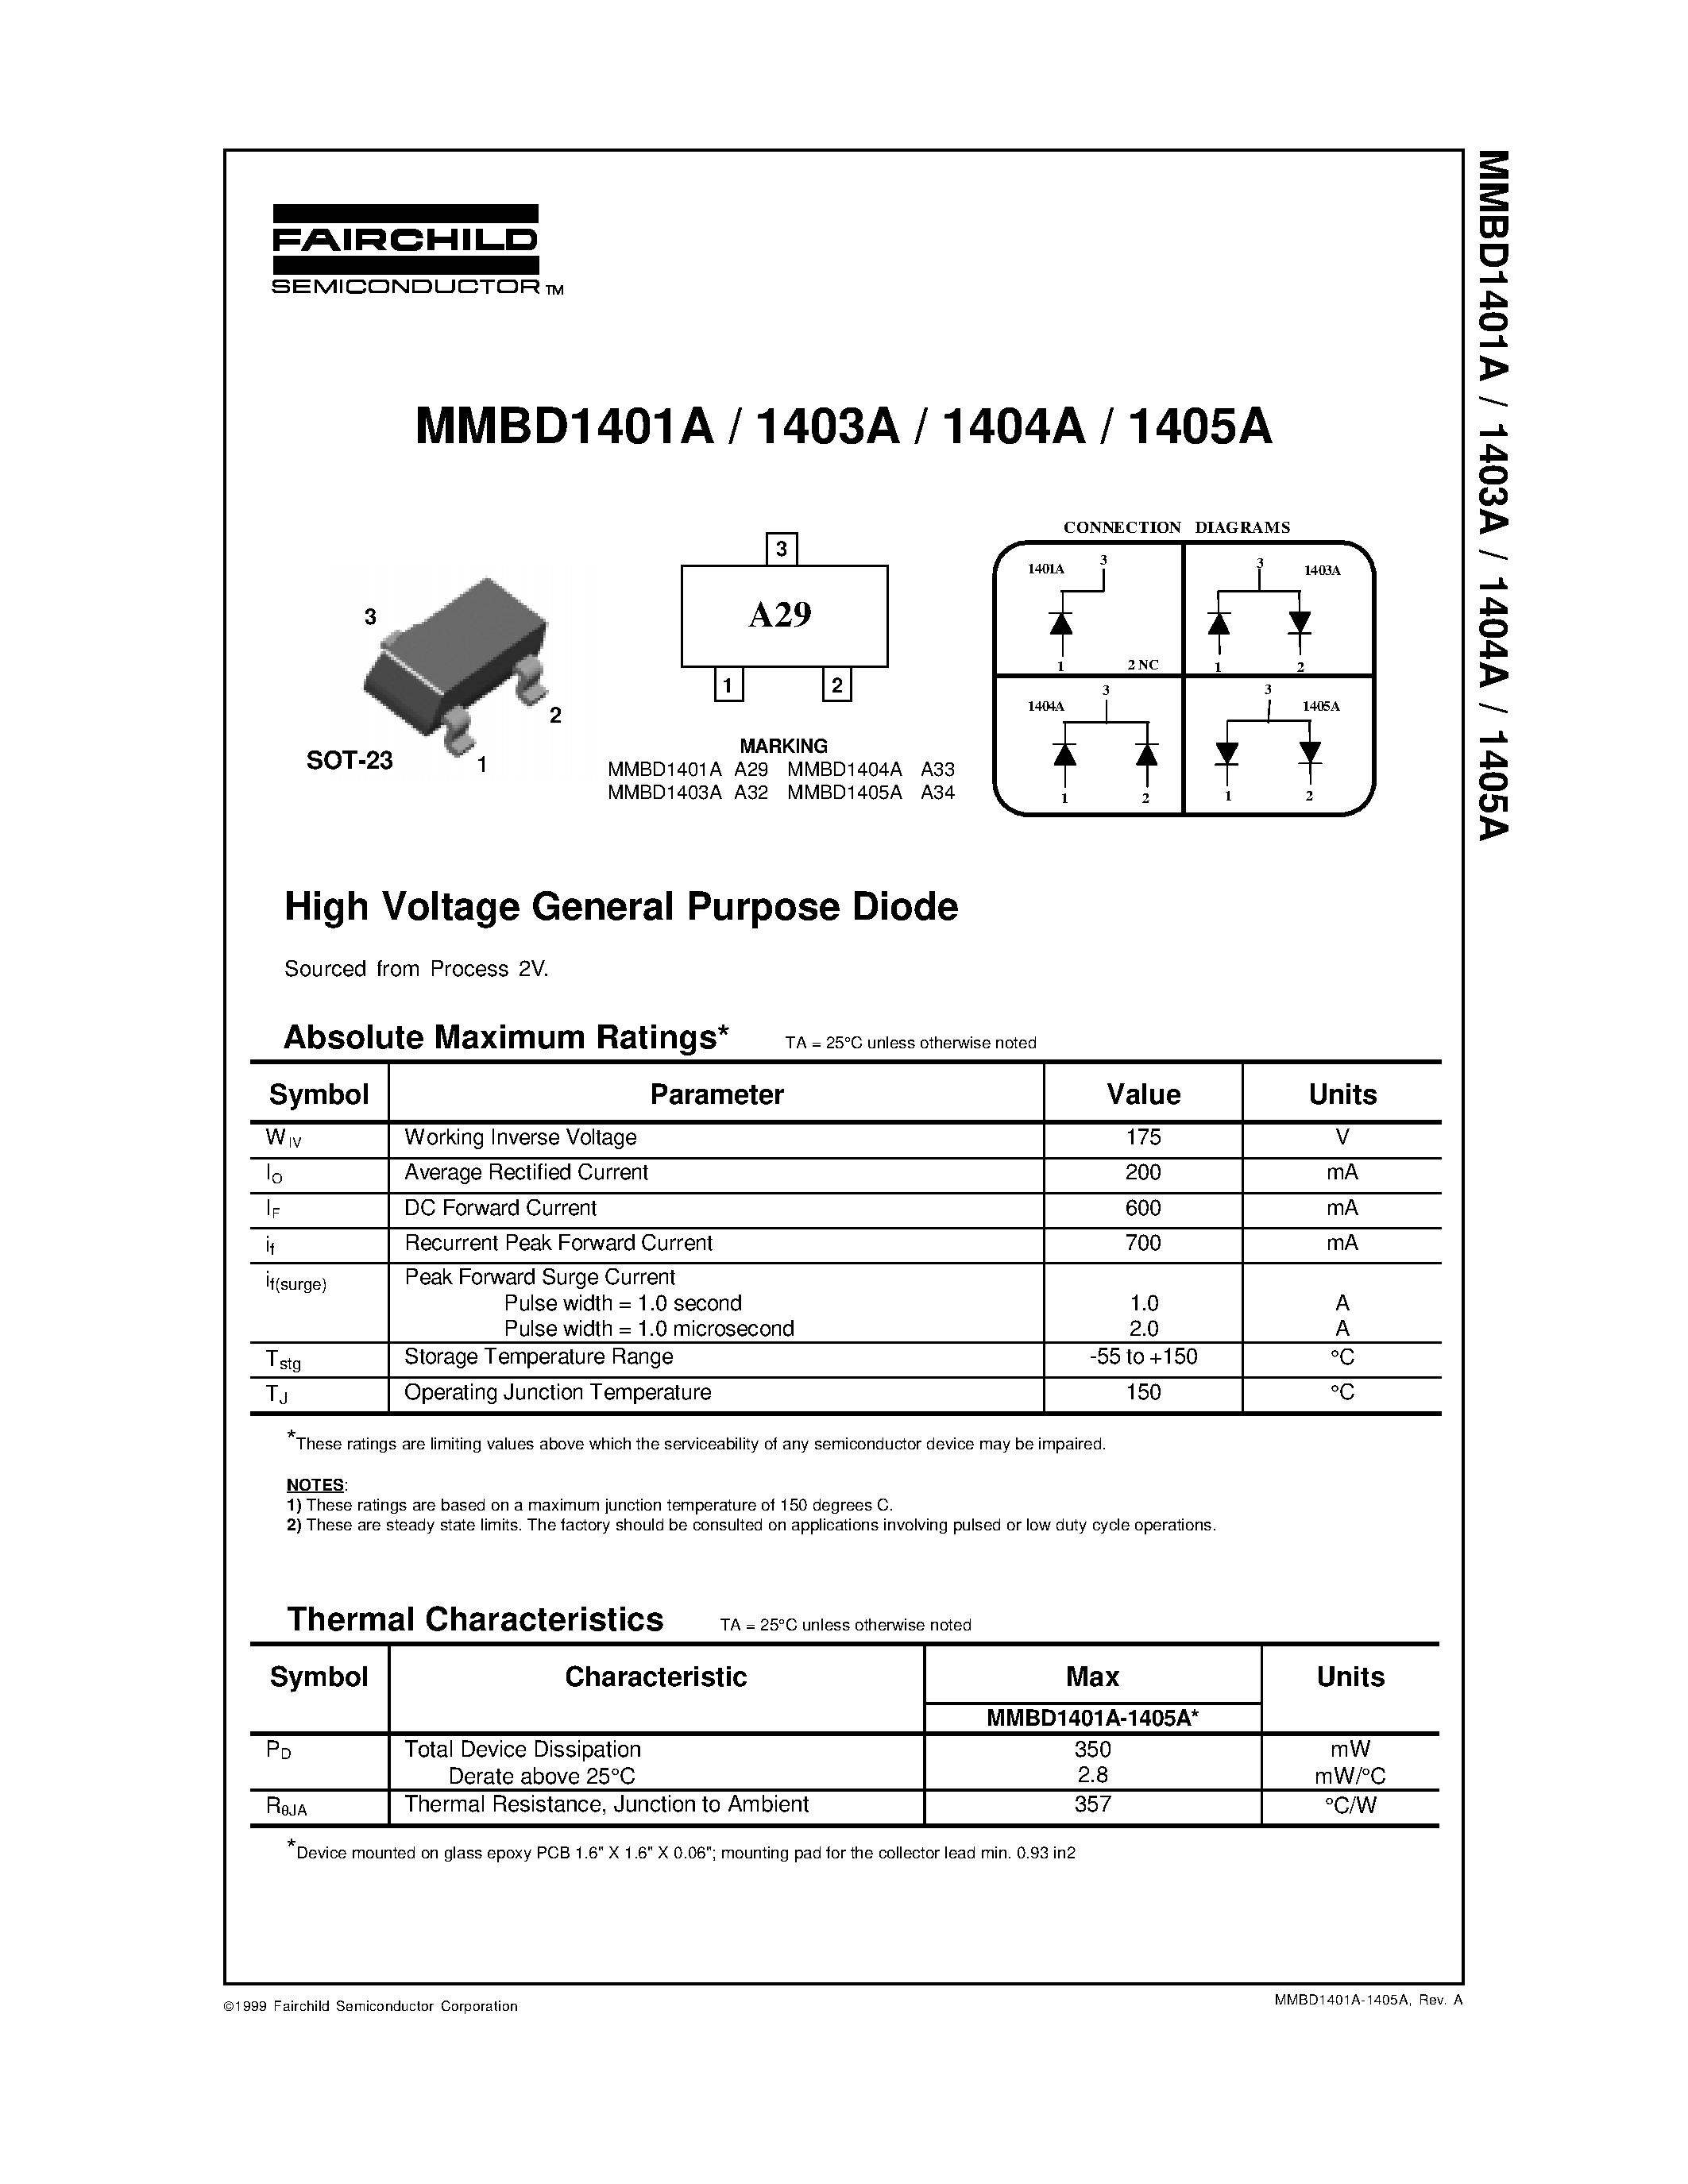 Datasheet MMBD1404A - High Voltage General Purpose Diode page 1